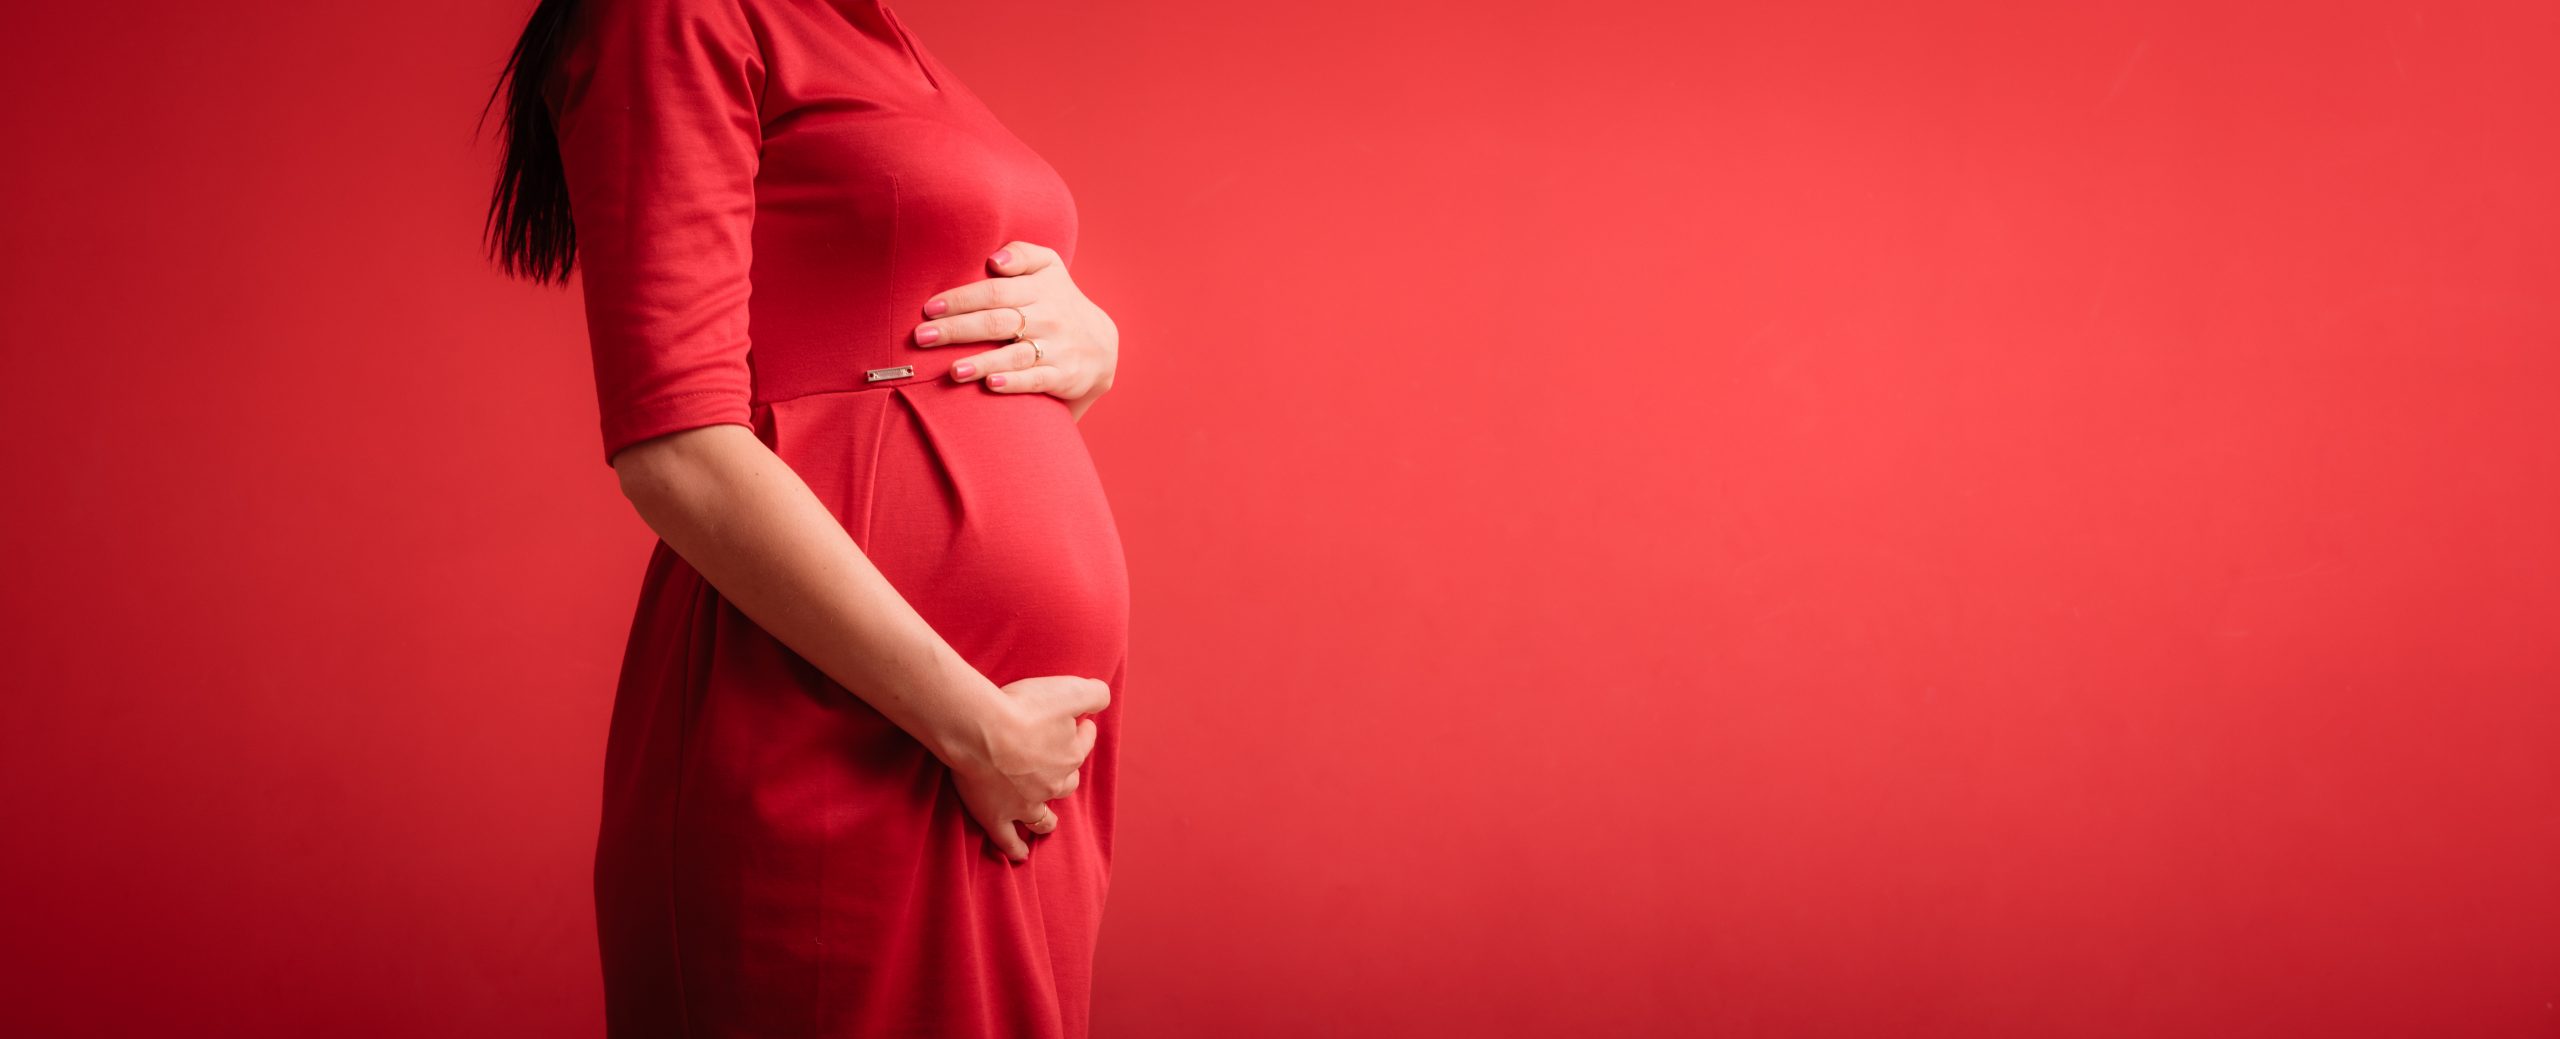 pregnant-woman-red-dress